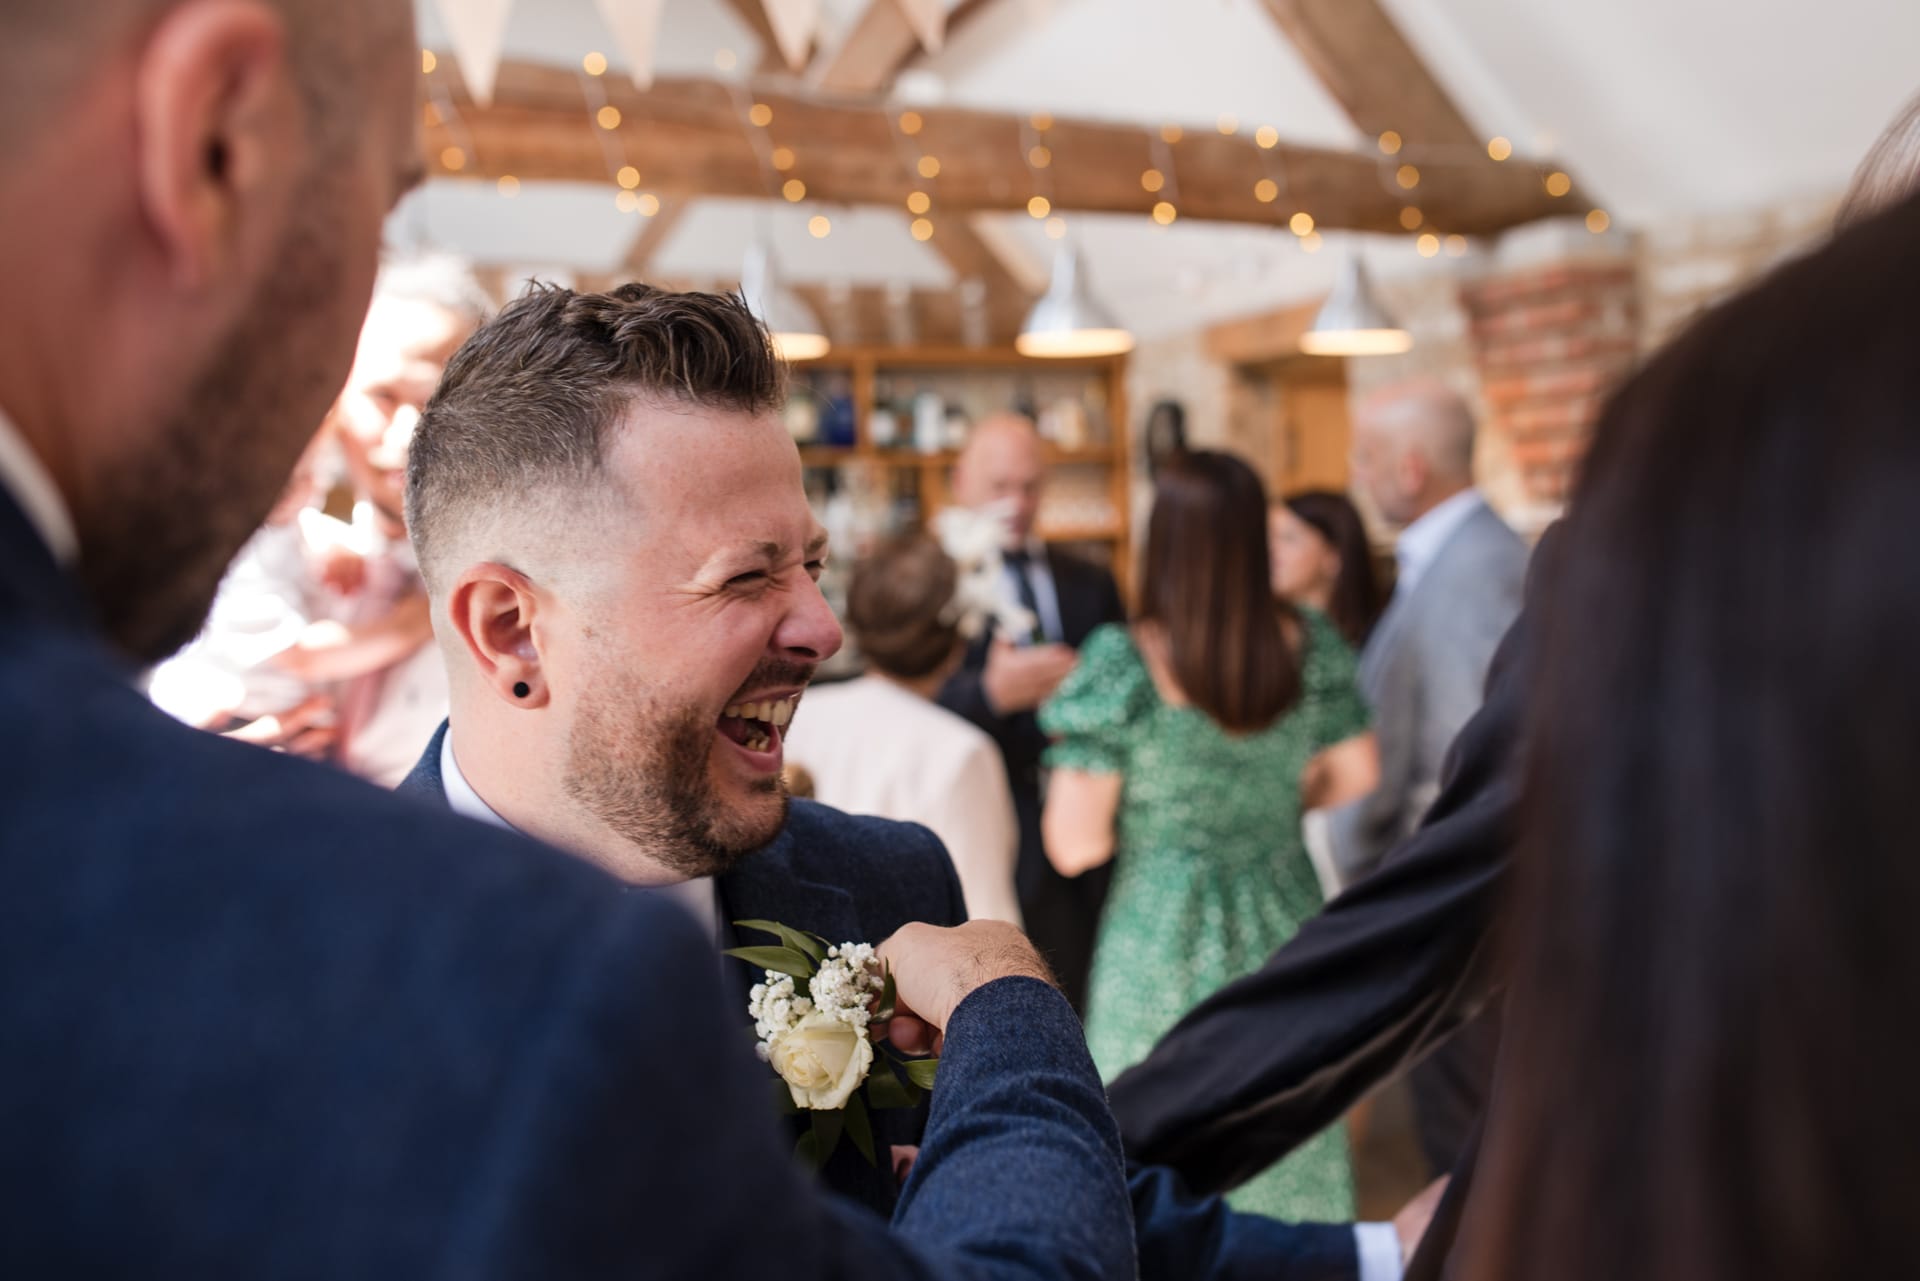 Fixing the pin on the groom whilst he is laughing